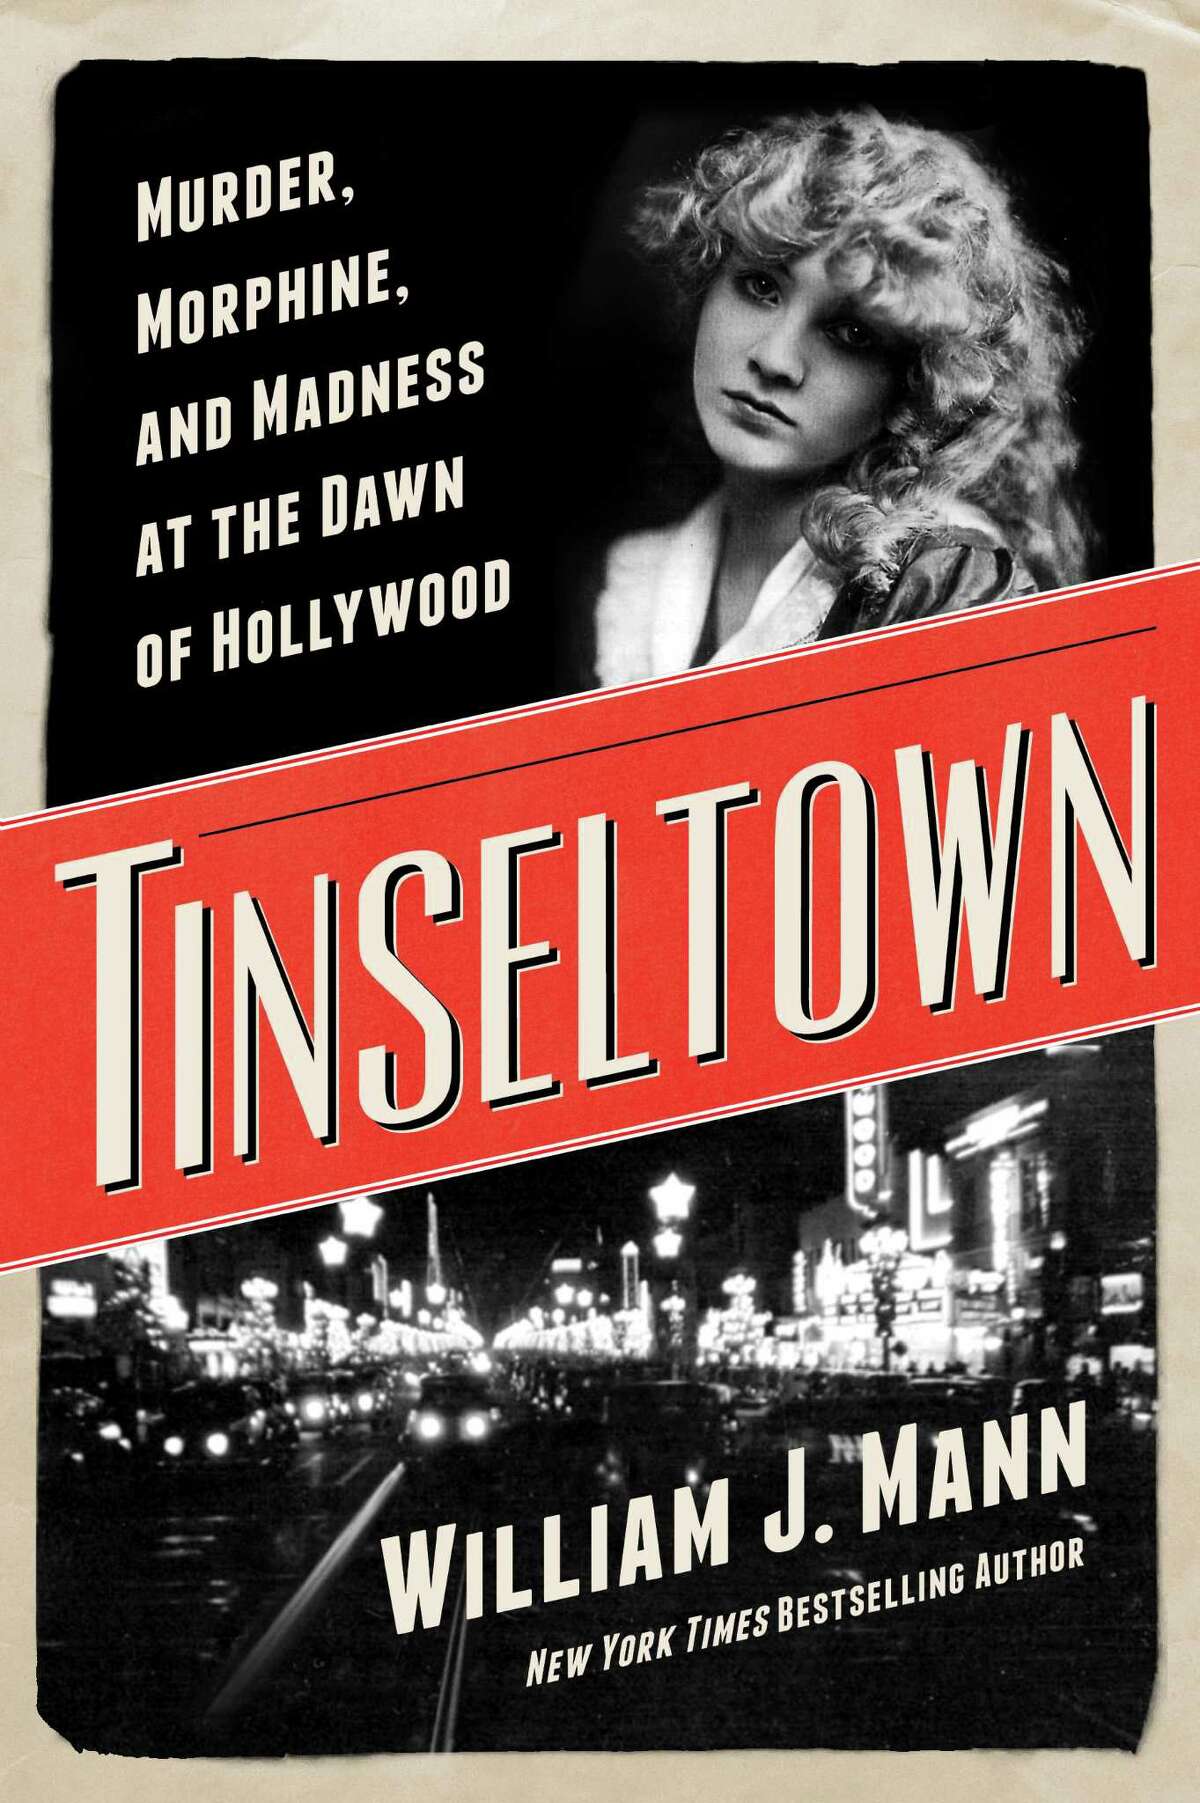 'Tinseltown' probes unsolved 1922 Hollywood murder